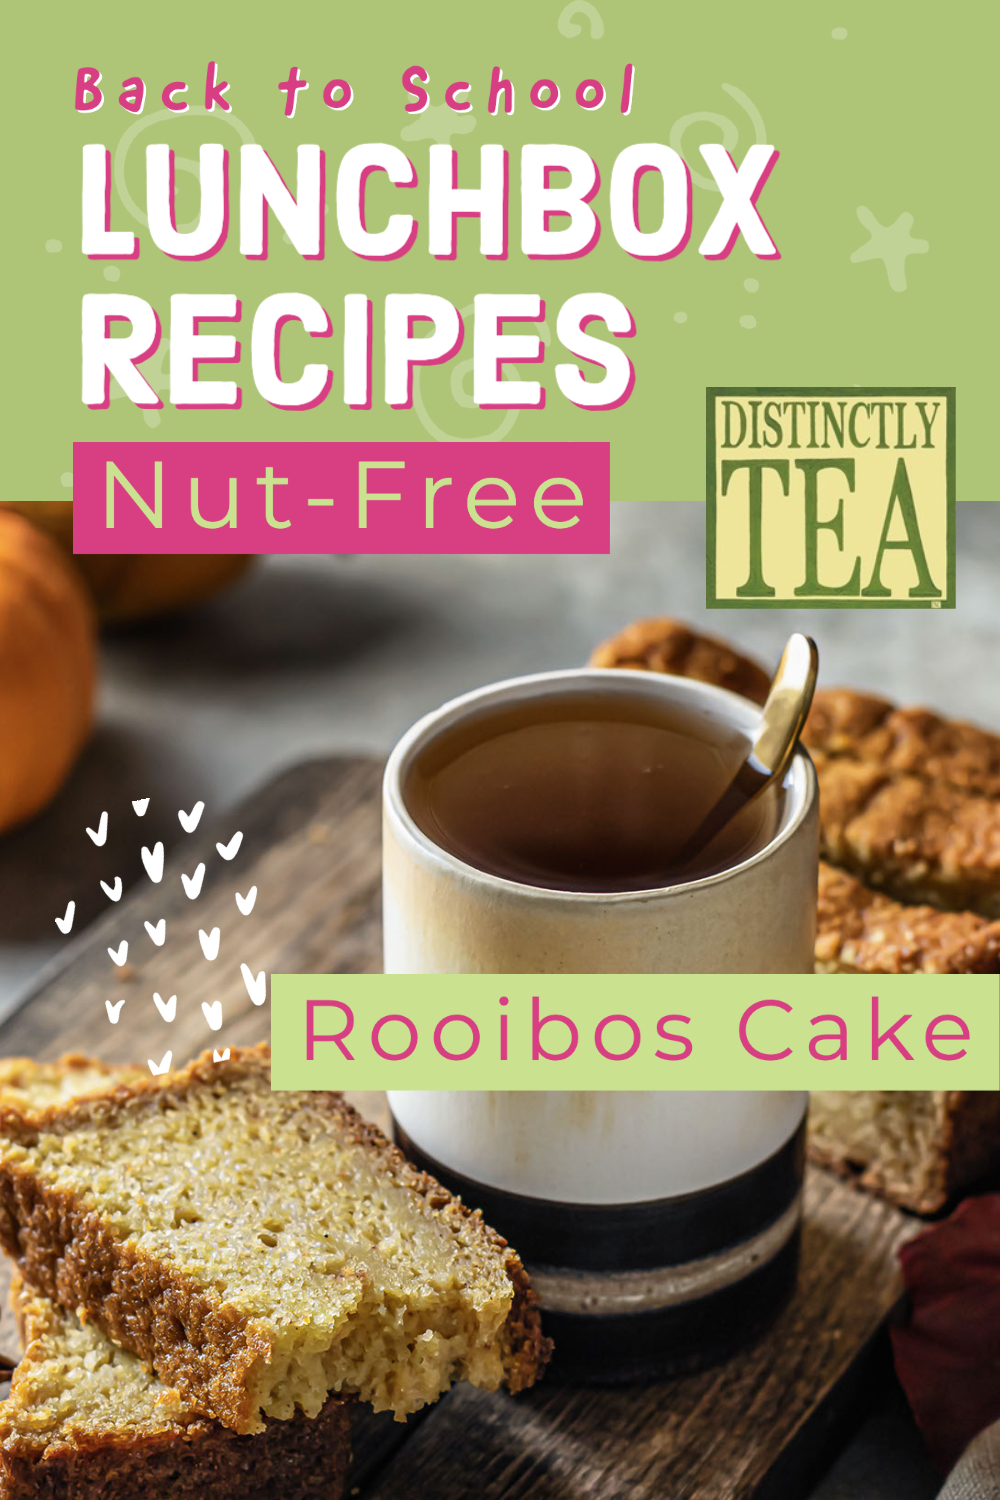 Rooibos cake recipe great for school lunches distinctly tea inc